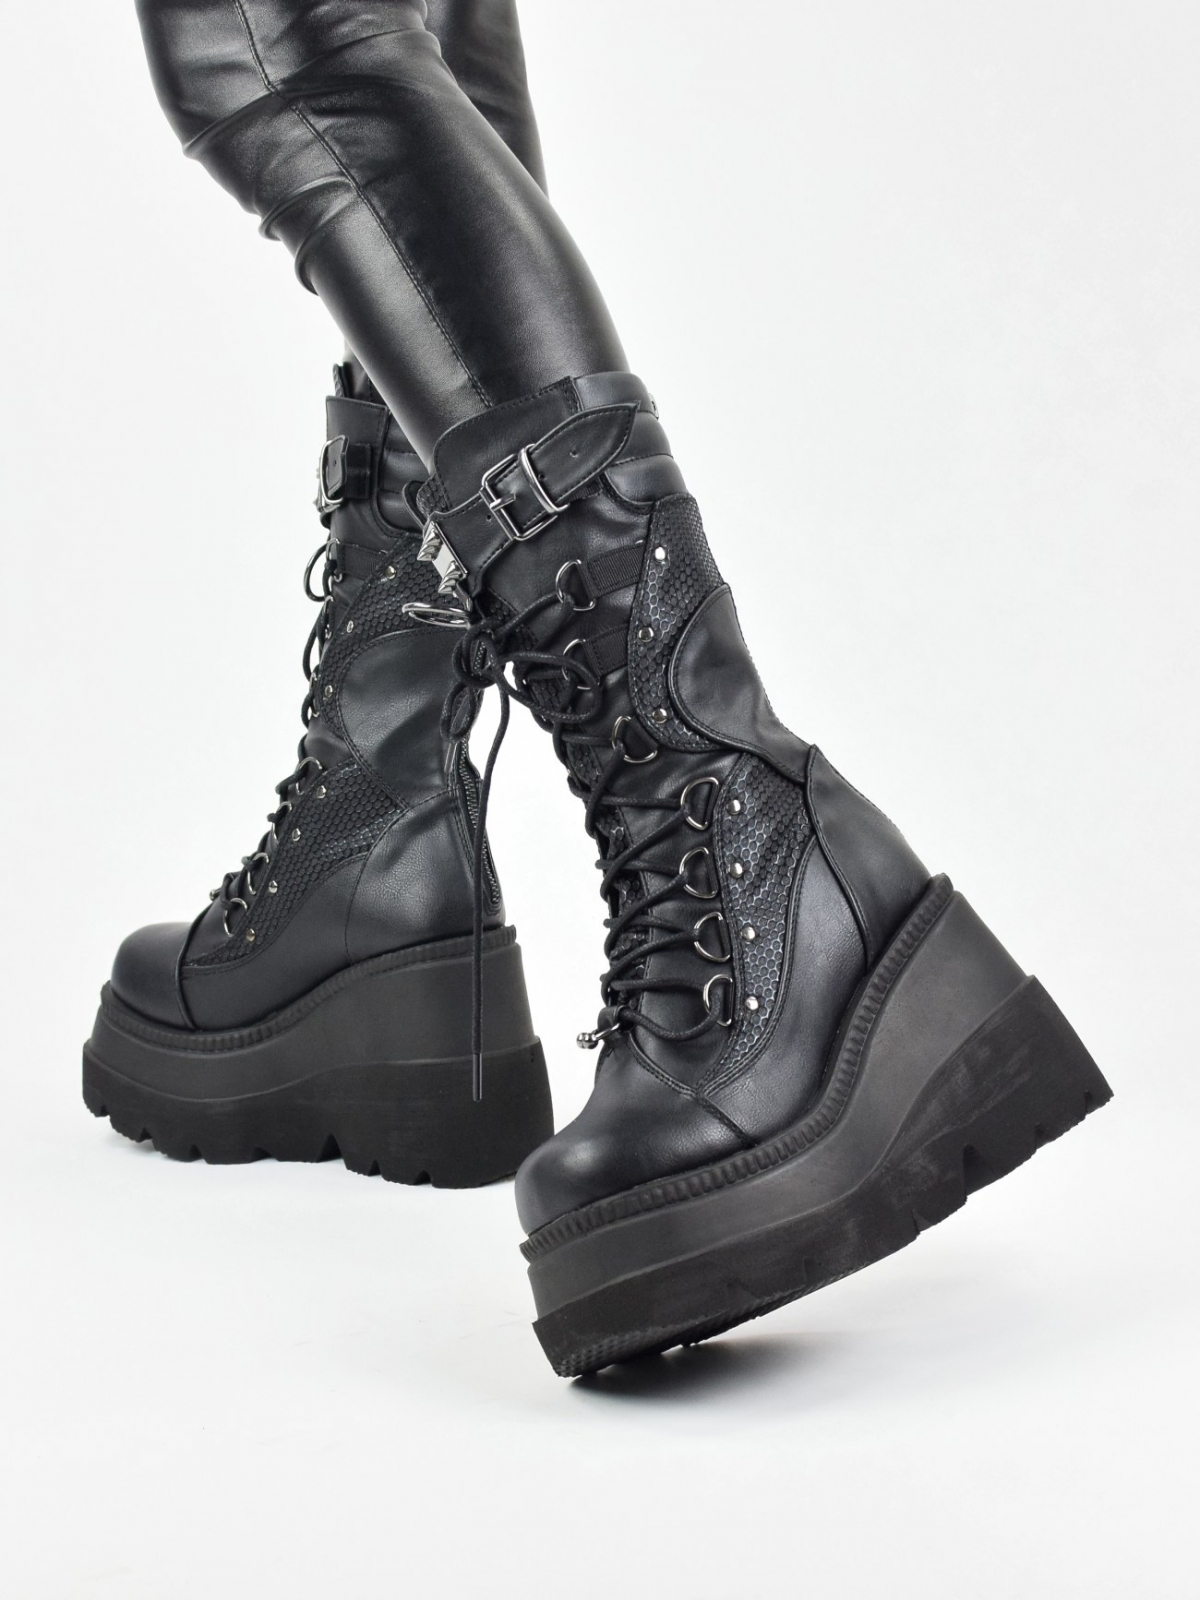 Demonia Shaker 70 lace up mid calf platform boots in black